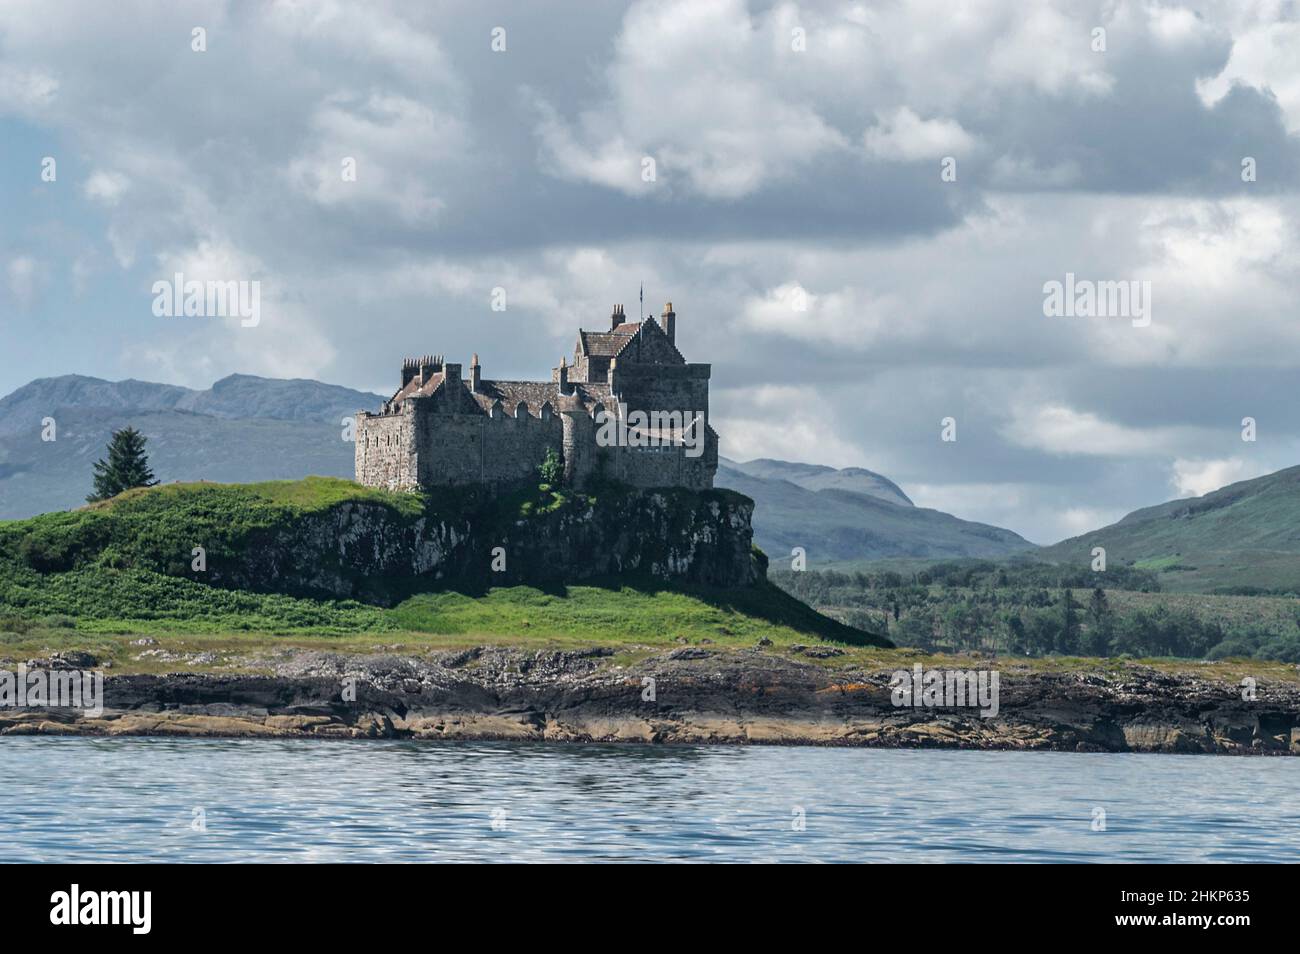 Duart Castle the 13th century castle and seat of Clan MacLean on a headland in the Sound of Mull and Loch Linnhe,Isle of Mull,Inner Hebridies,Scotland Stock Photo